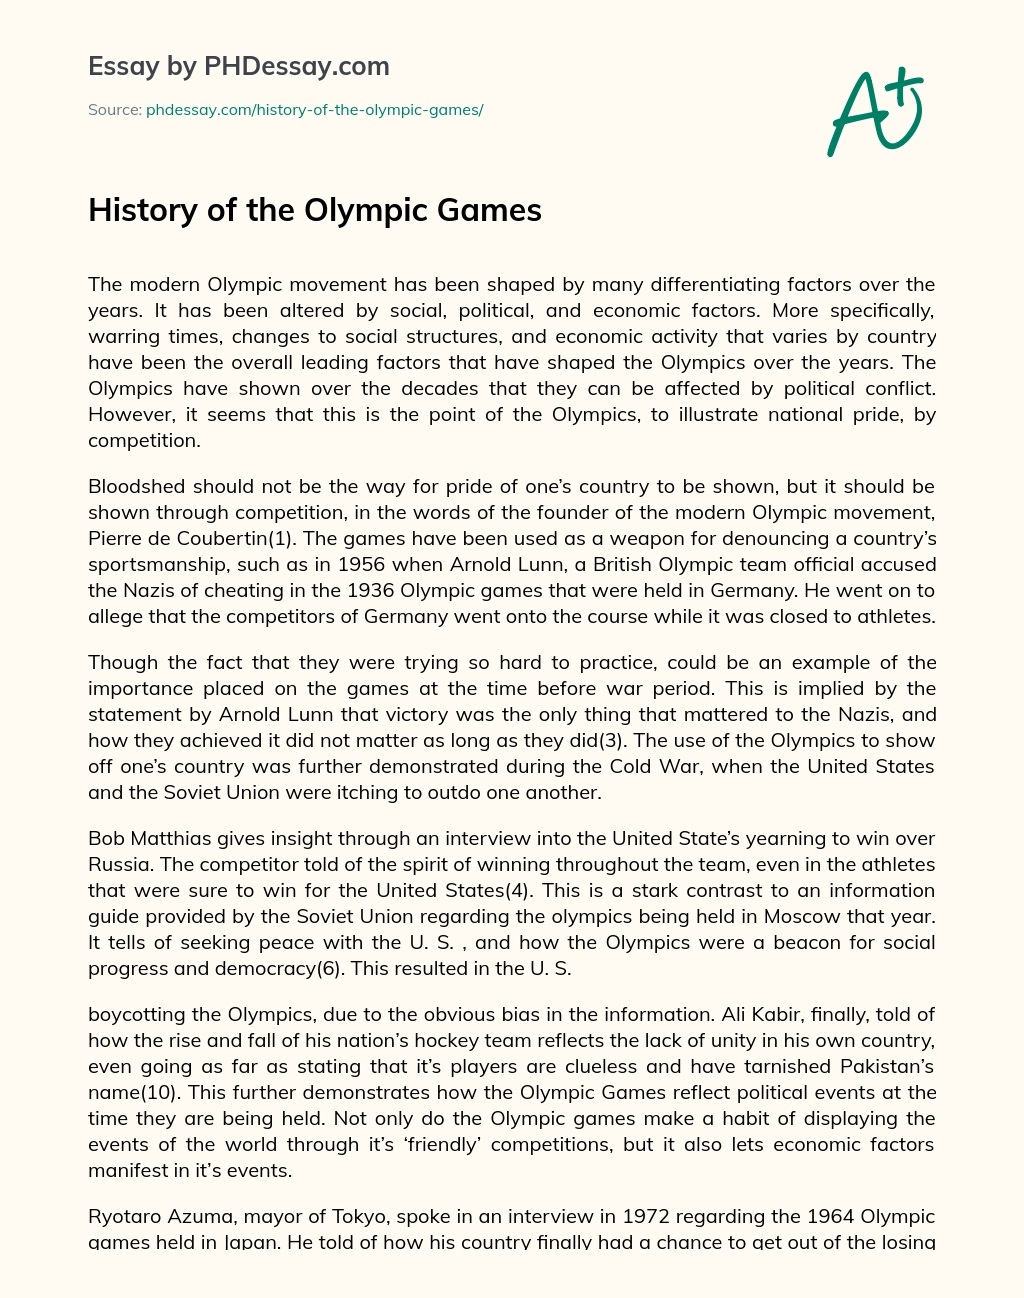 History of the Olympic Games essay